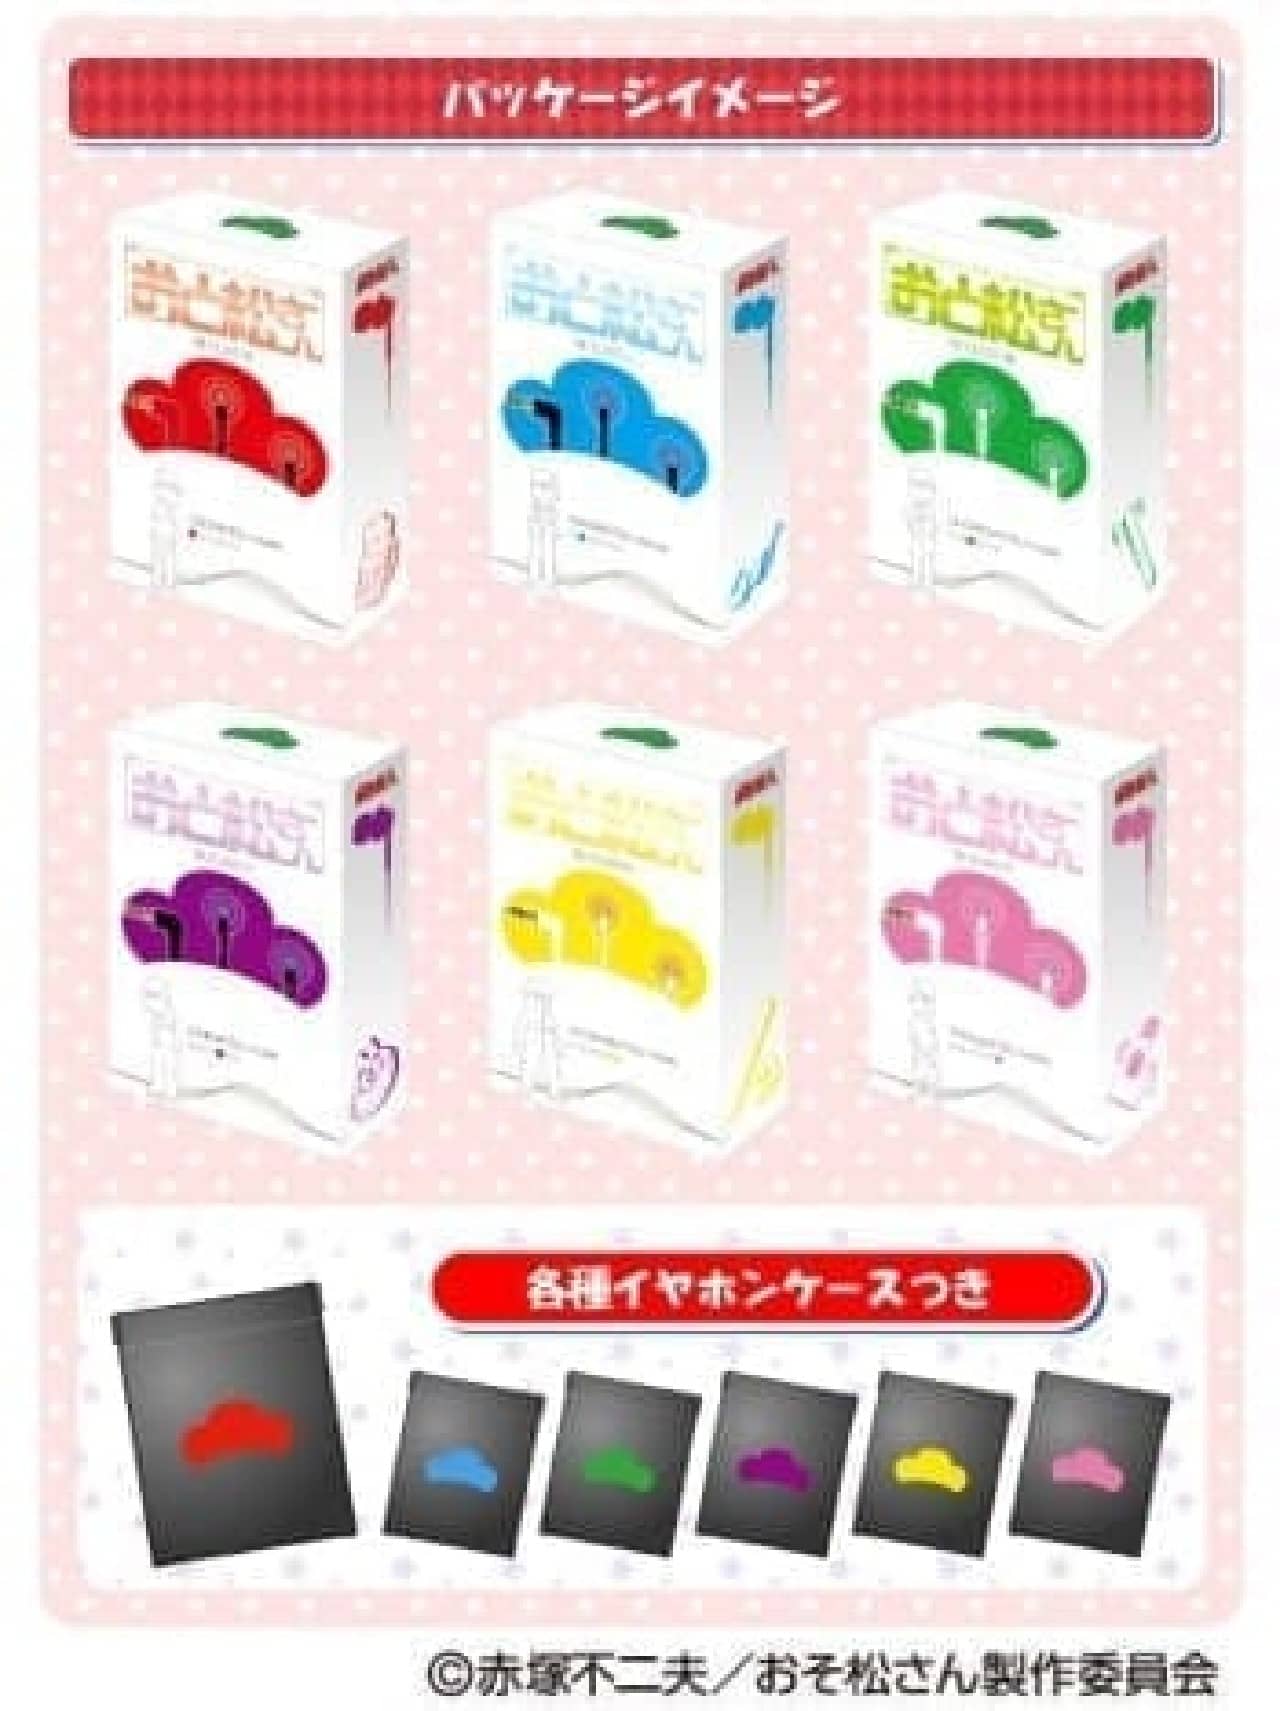 Package and earphone case tailored to each character